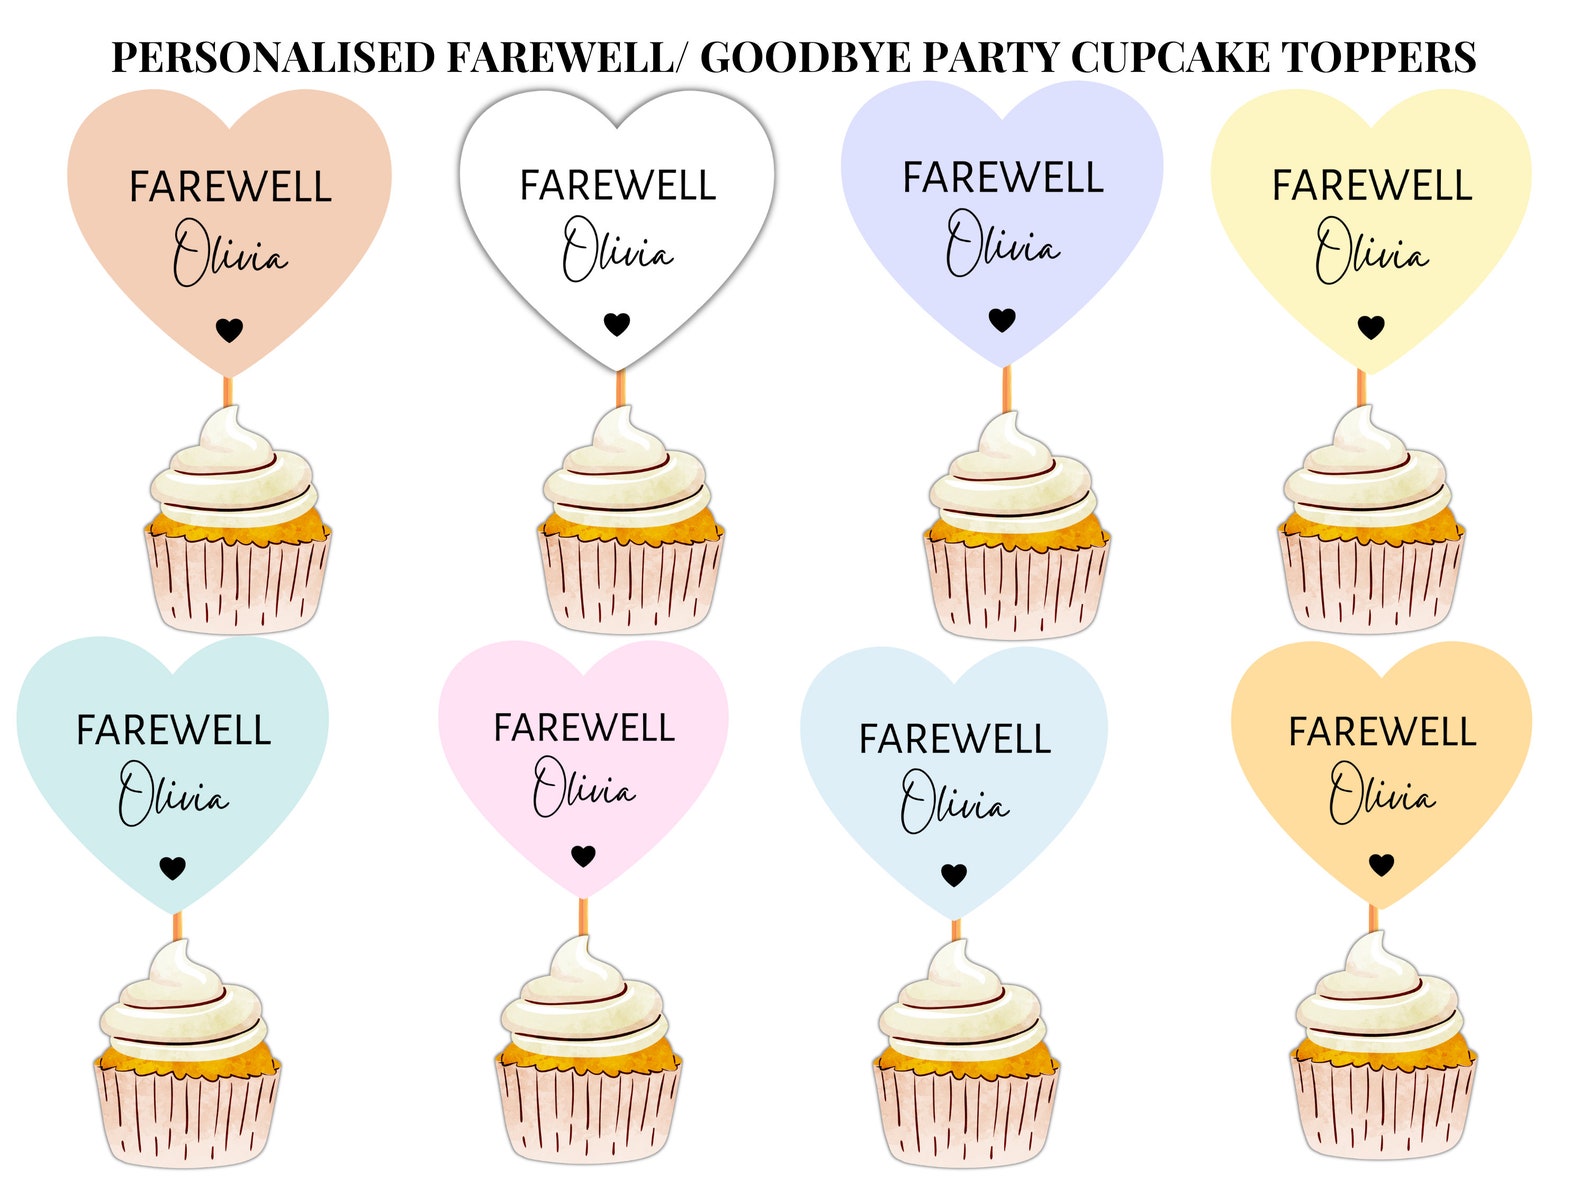 personalised-farewell-cupcake-toppers-pastel-heart-shaped-etsy